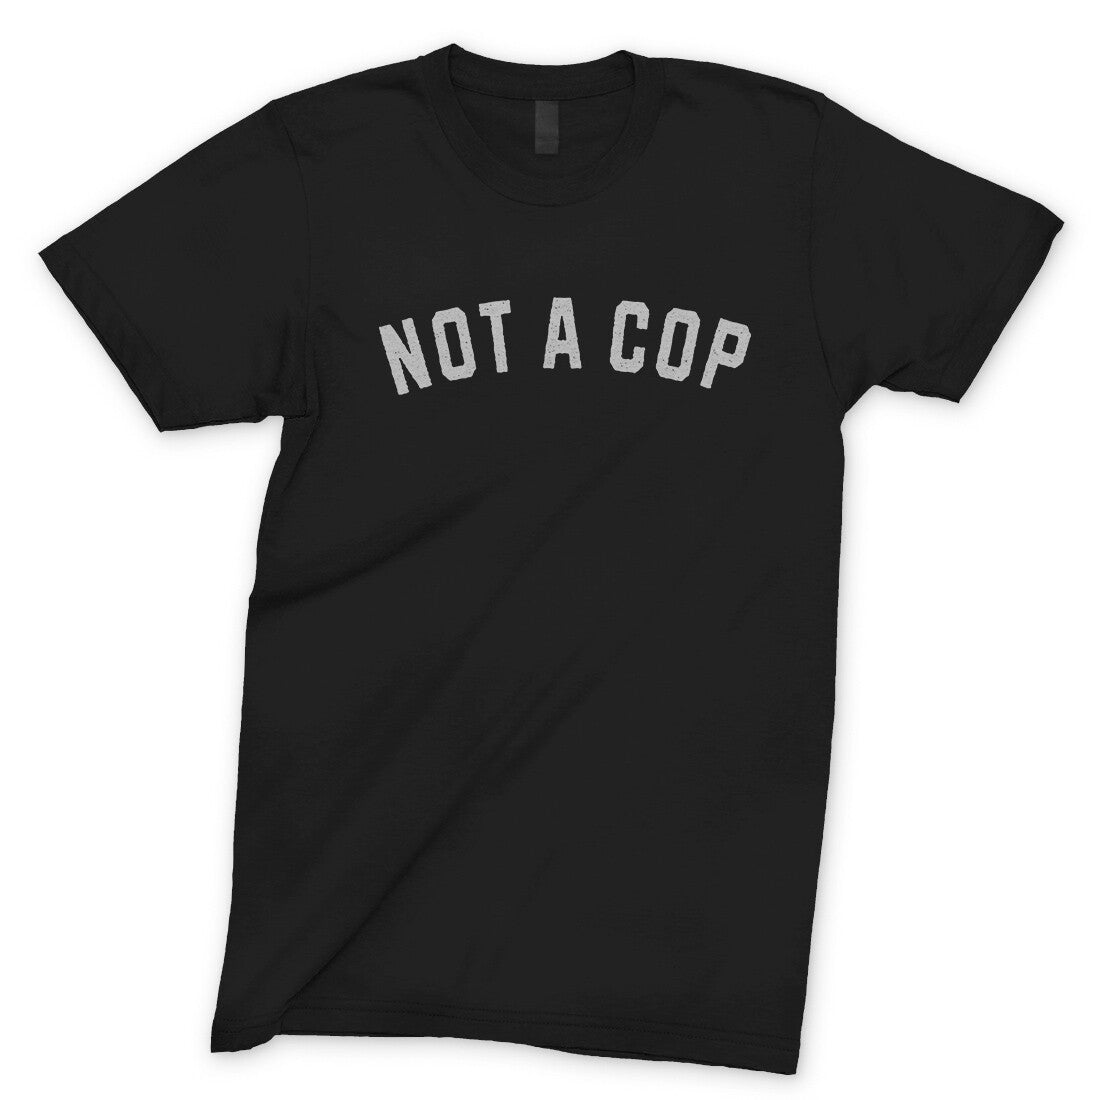 Not a Cop in Black Color